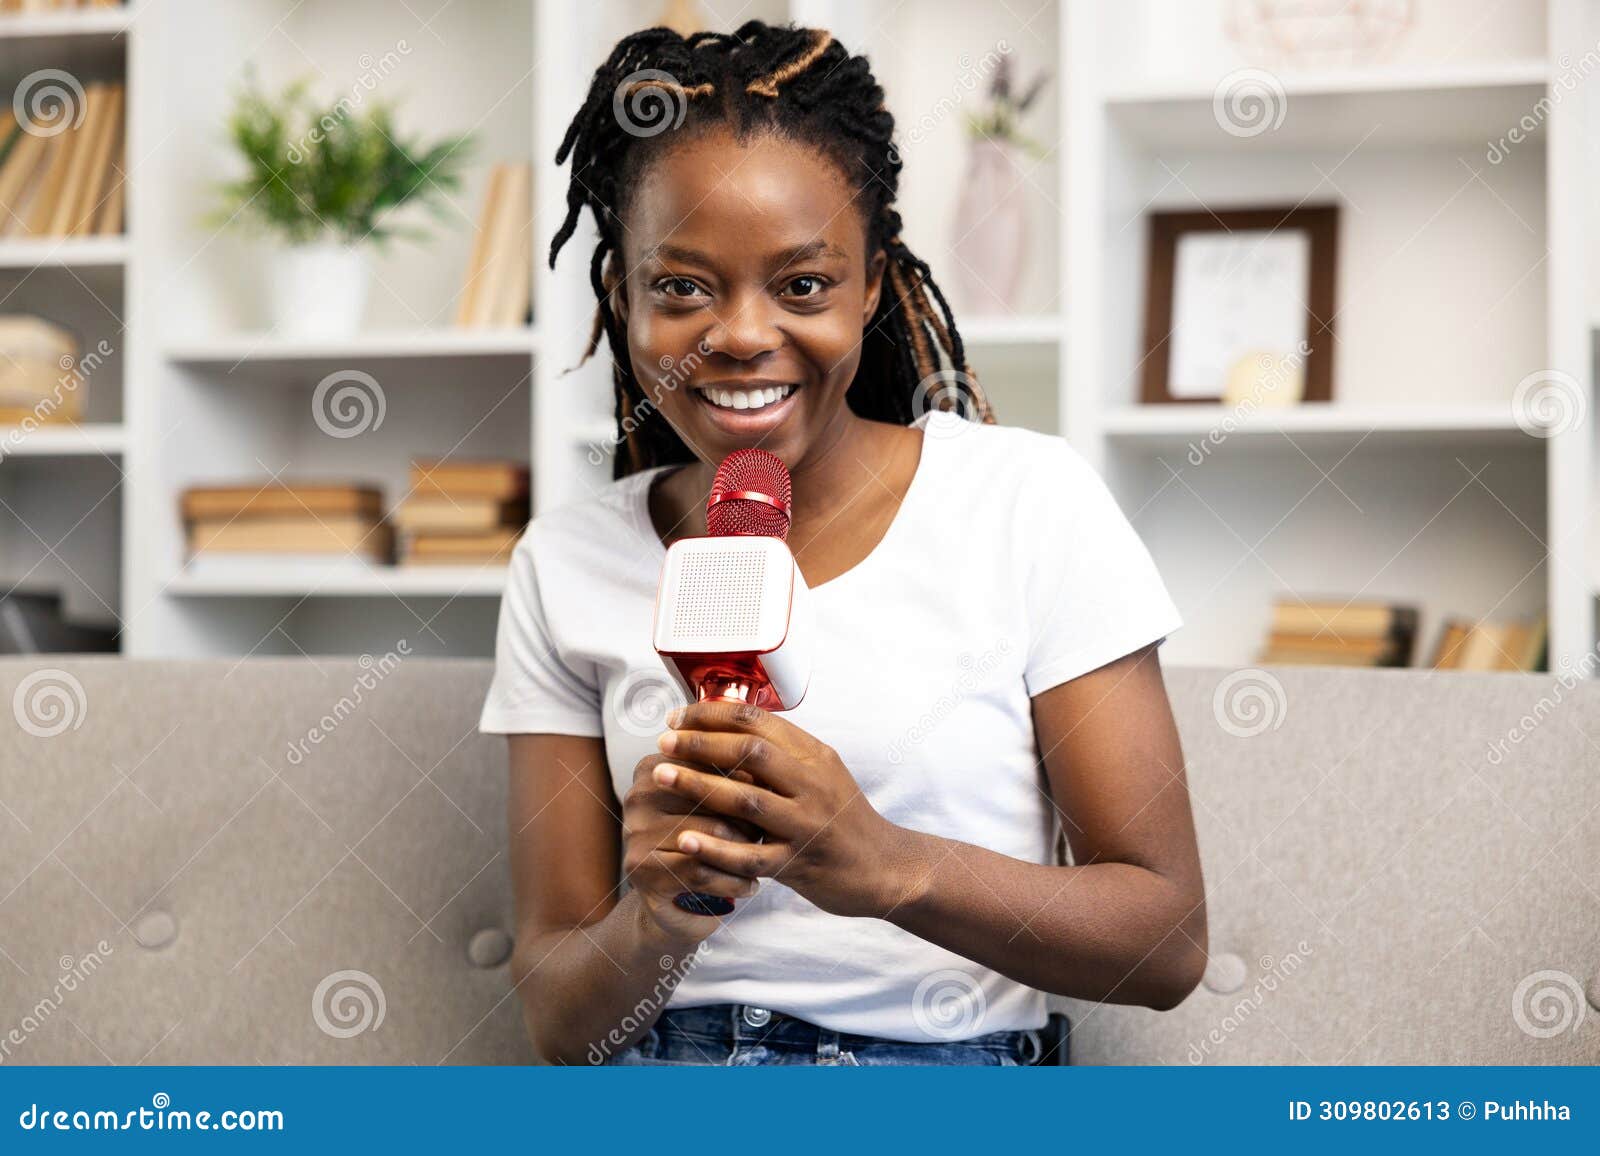 afro american woman enjoying podcasting with microphone at home